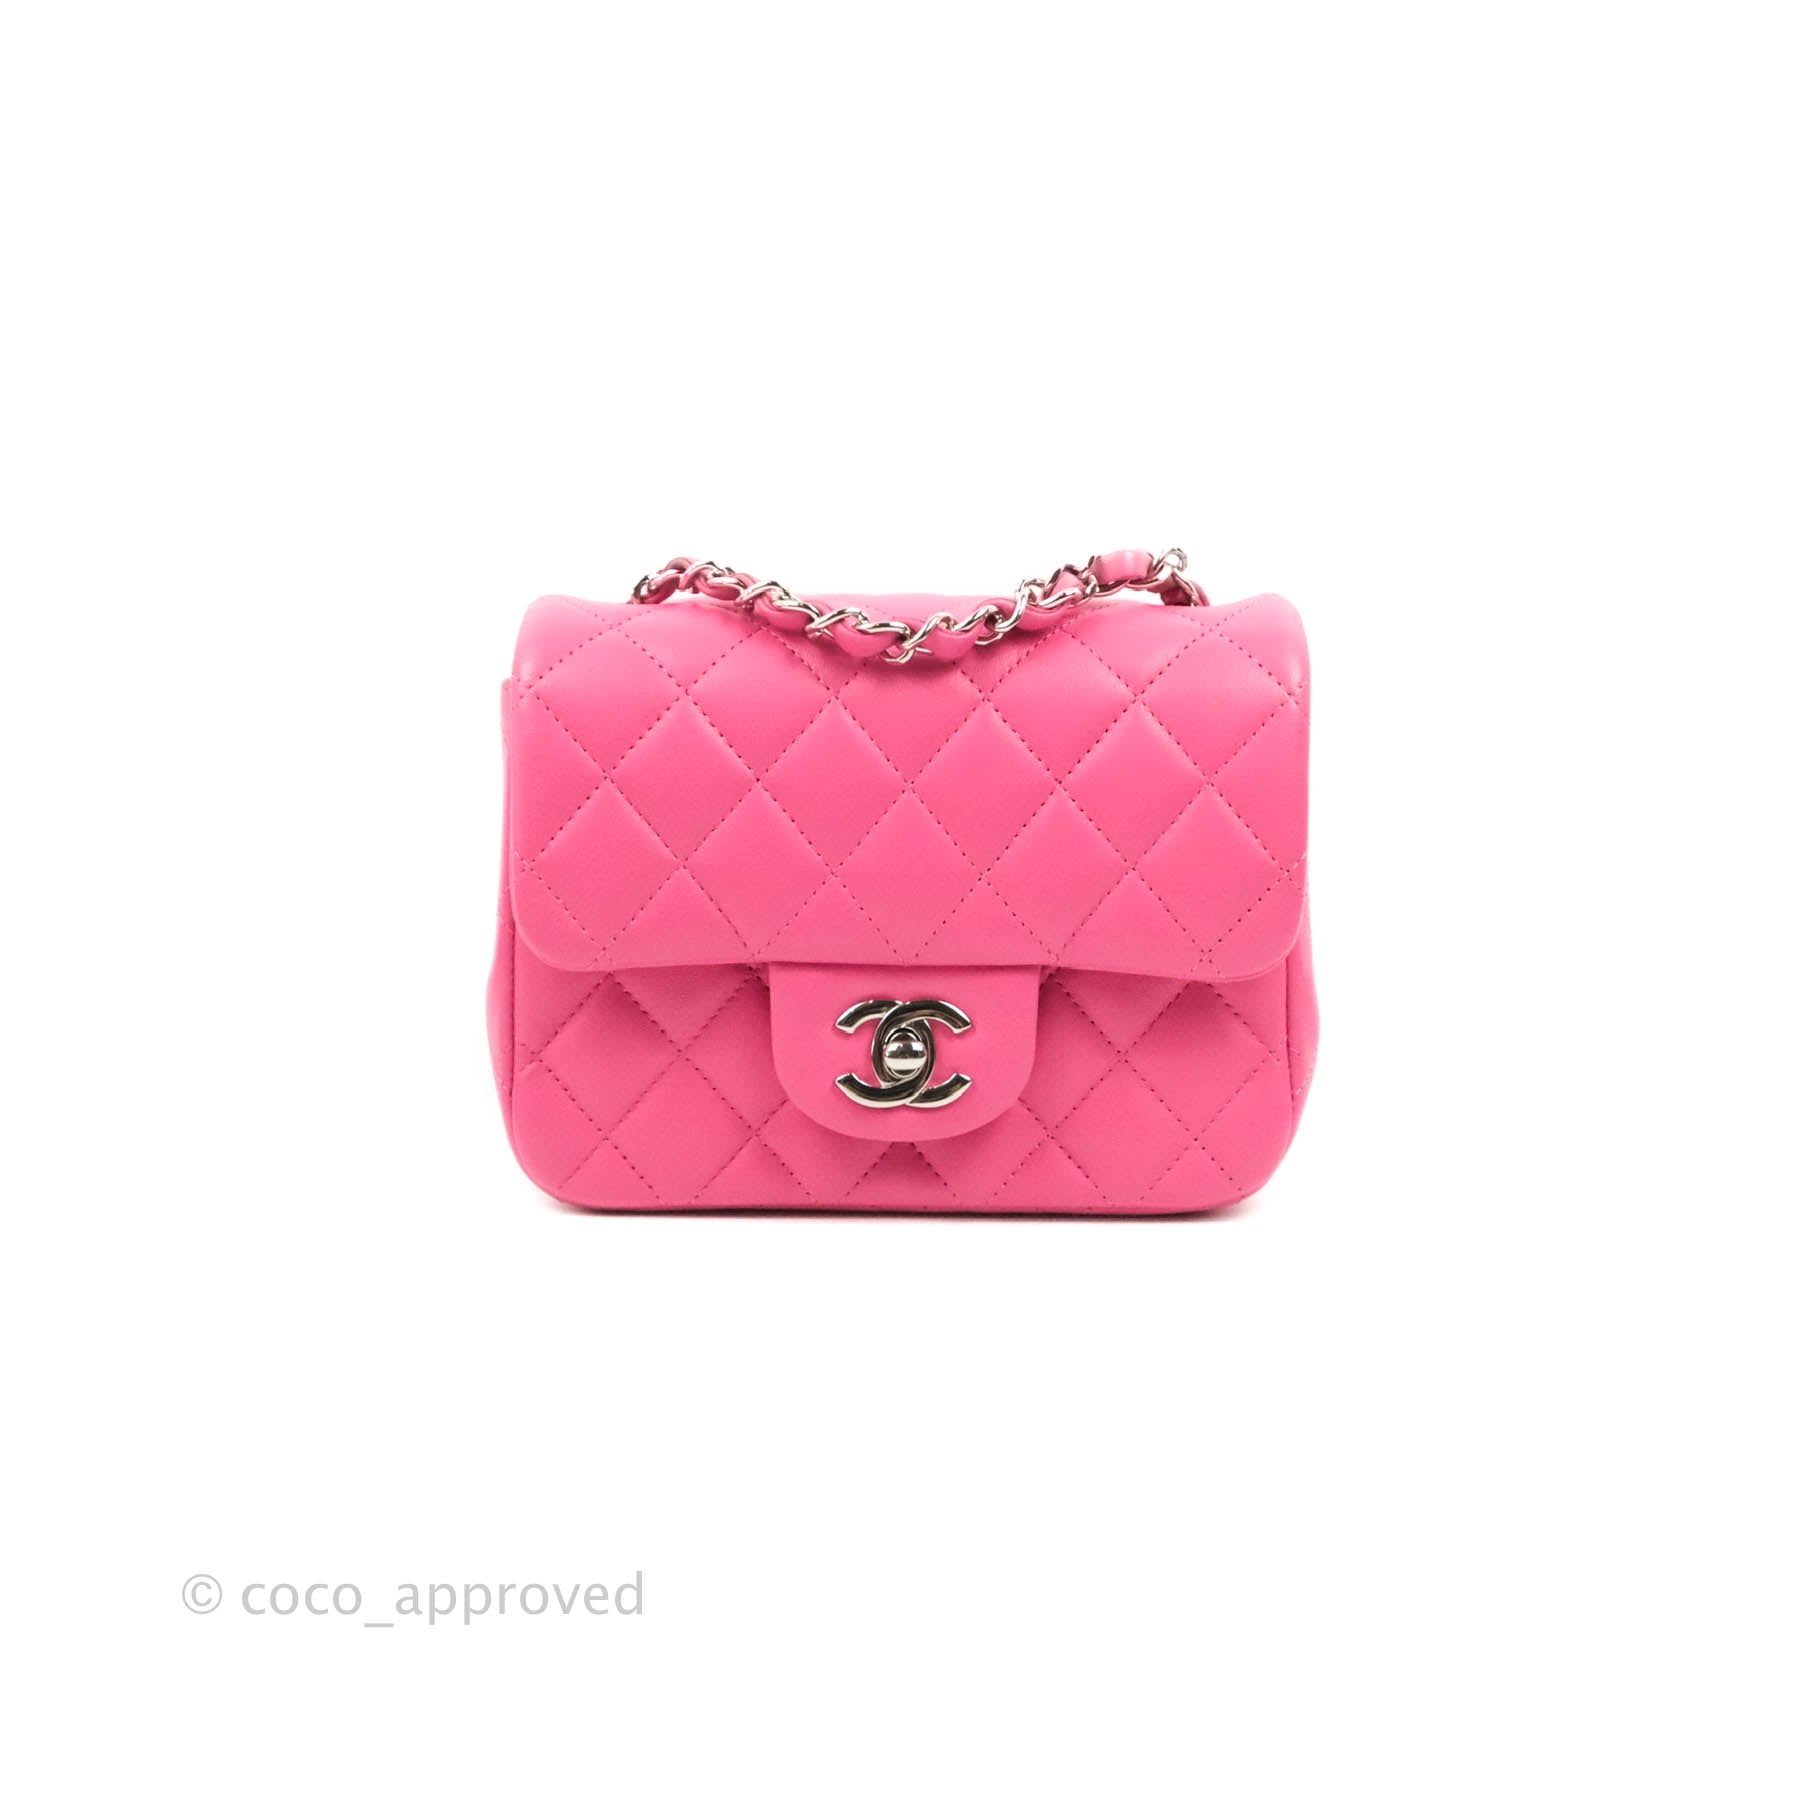 Chanel Pink Quilted Leather Mini Square Classic Flap Bag Chanel